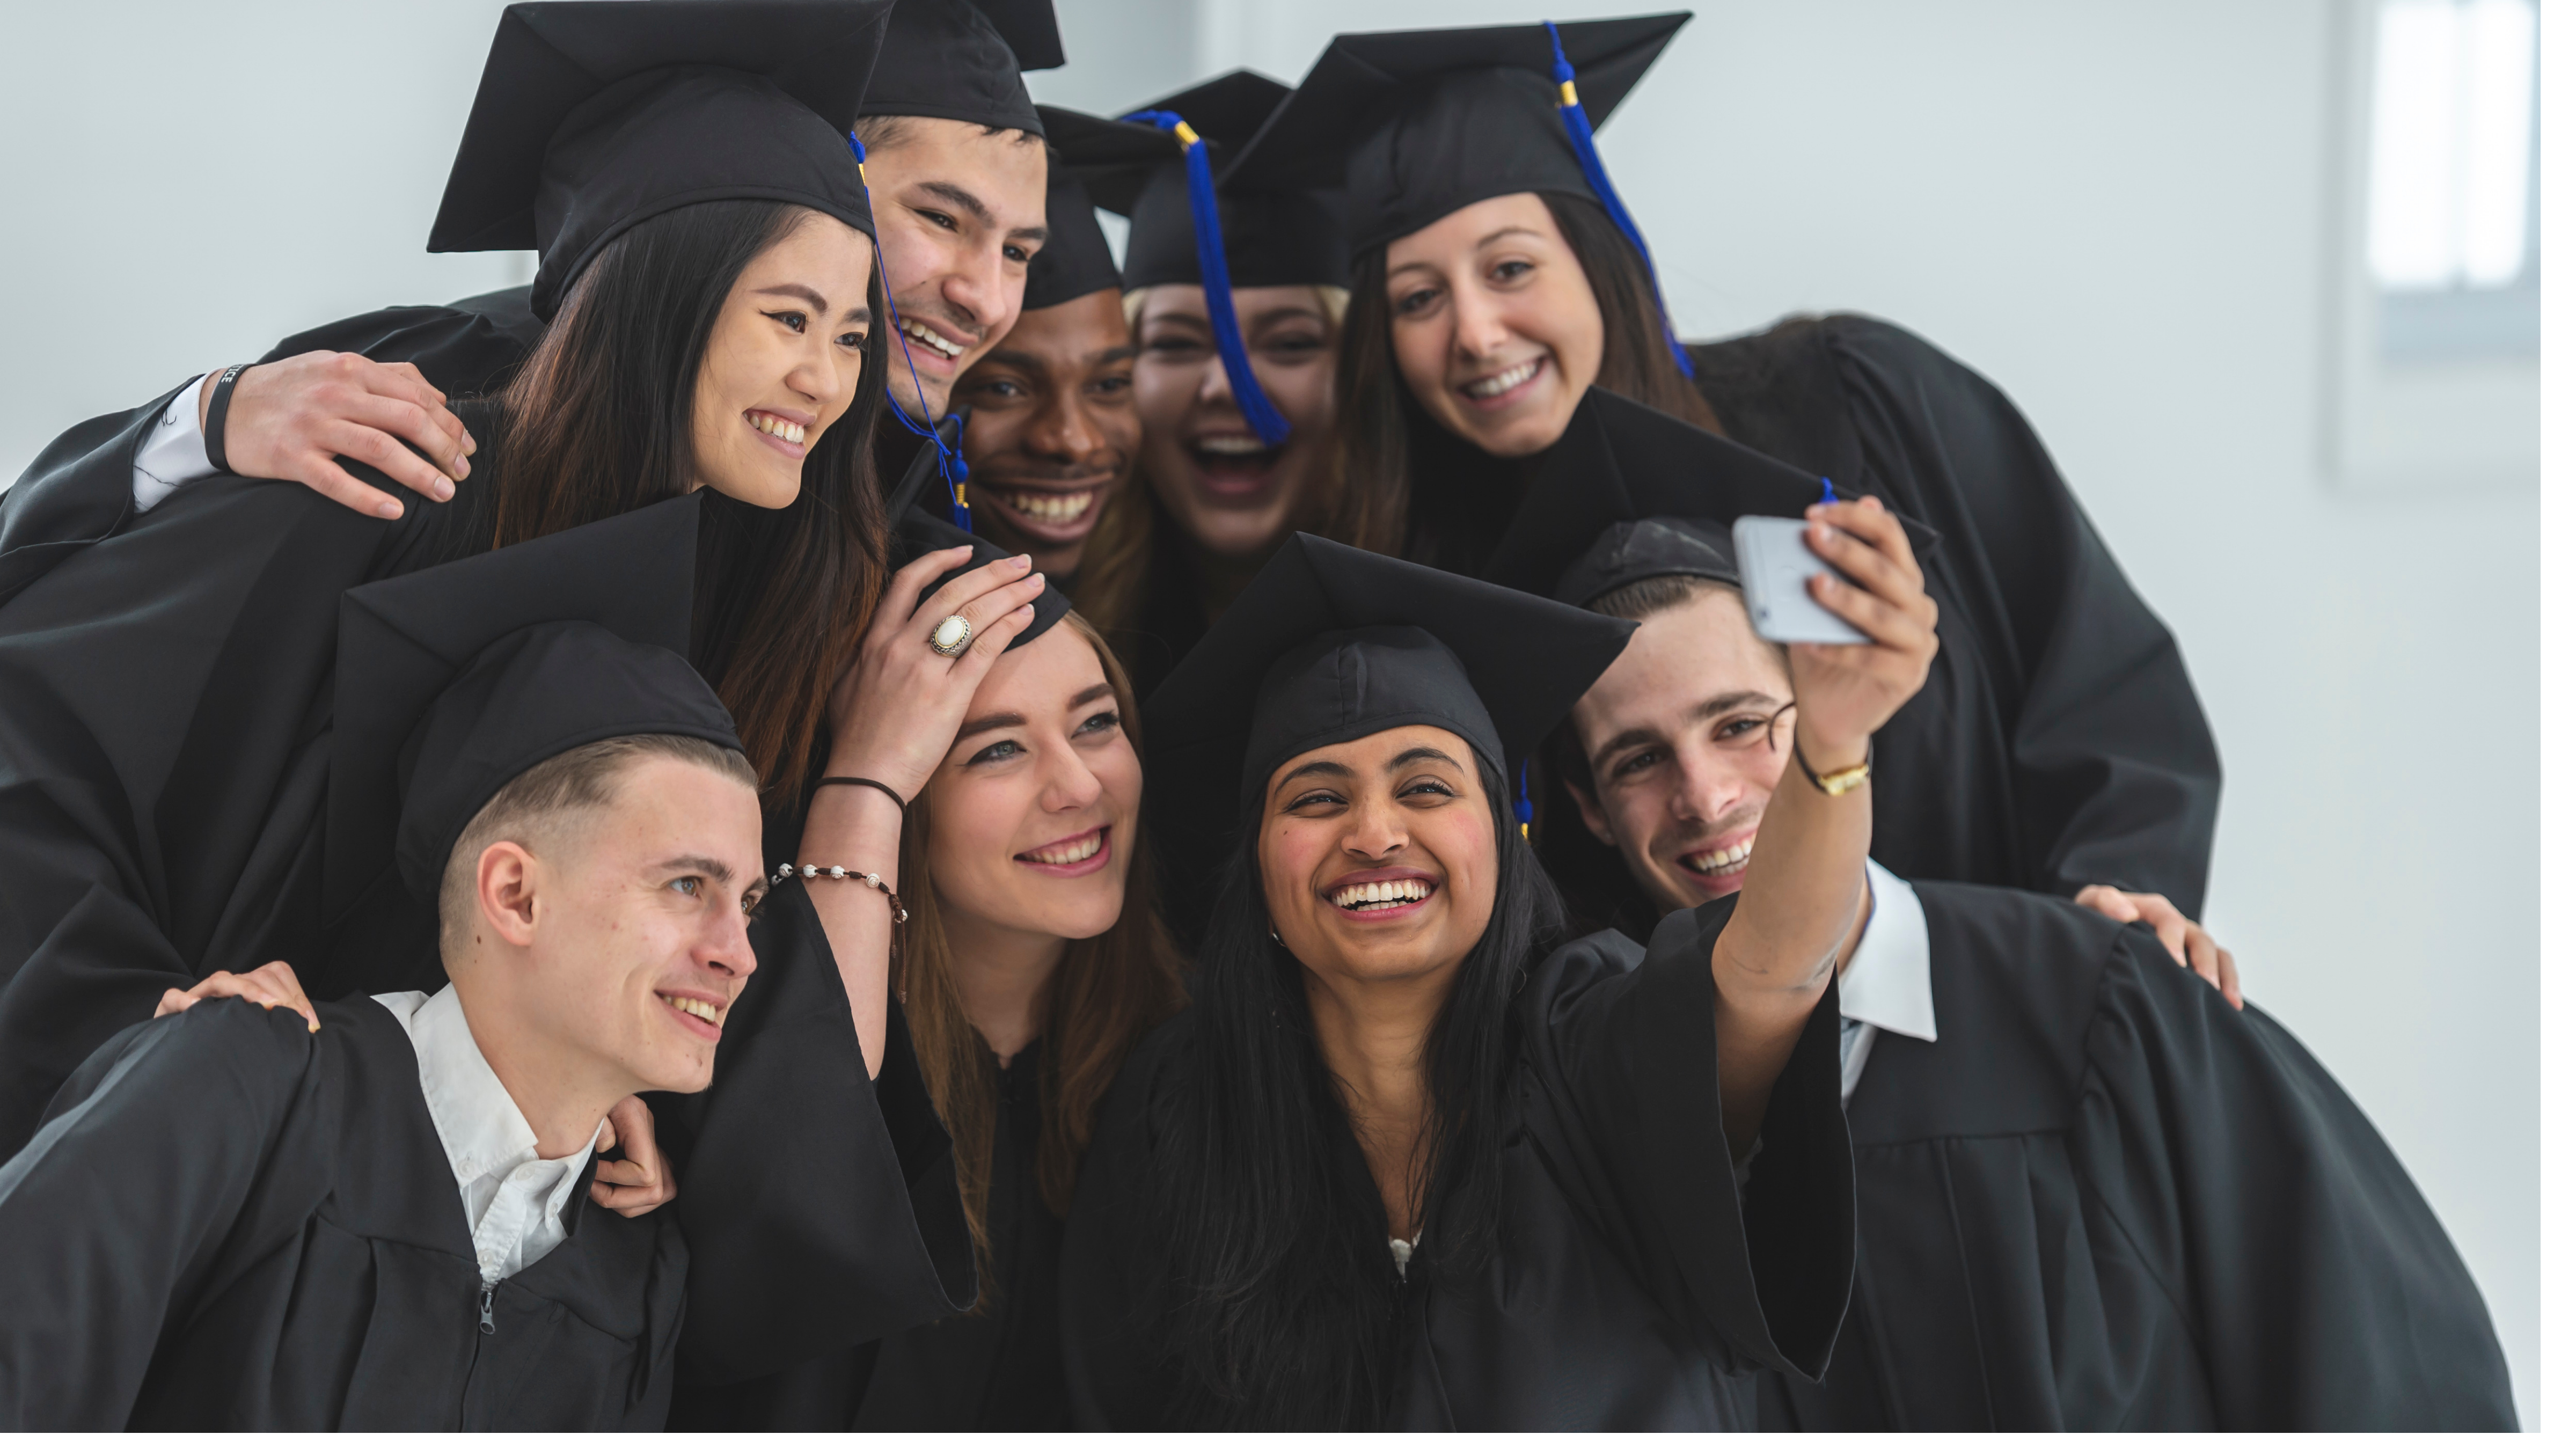 A diverse group of nine students in graduation gowns and hats taking a group photo of themselves